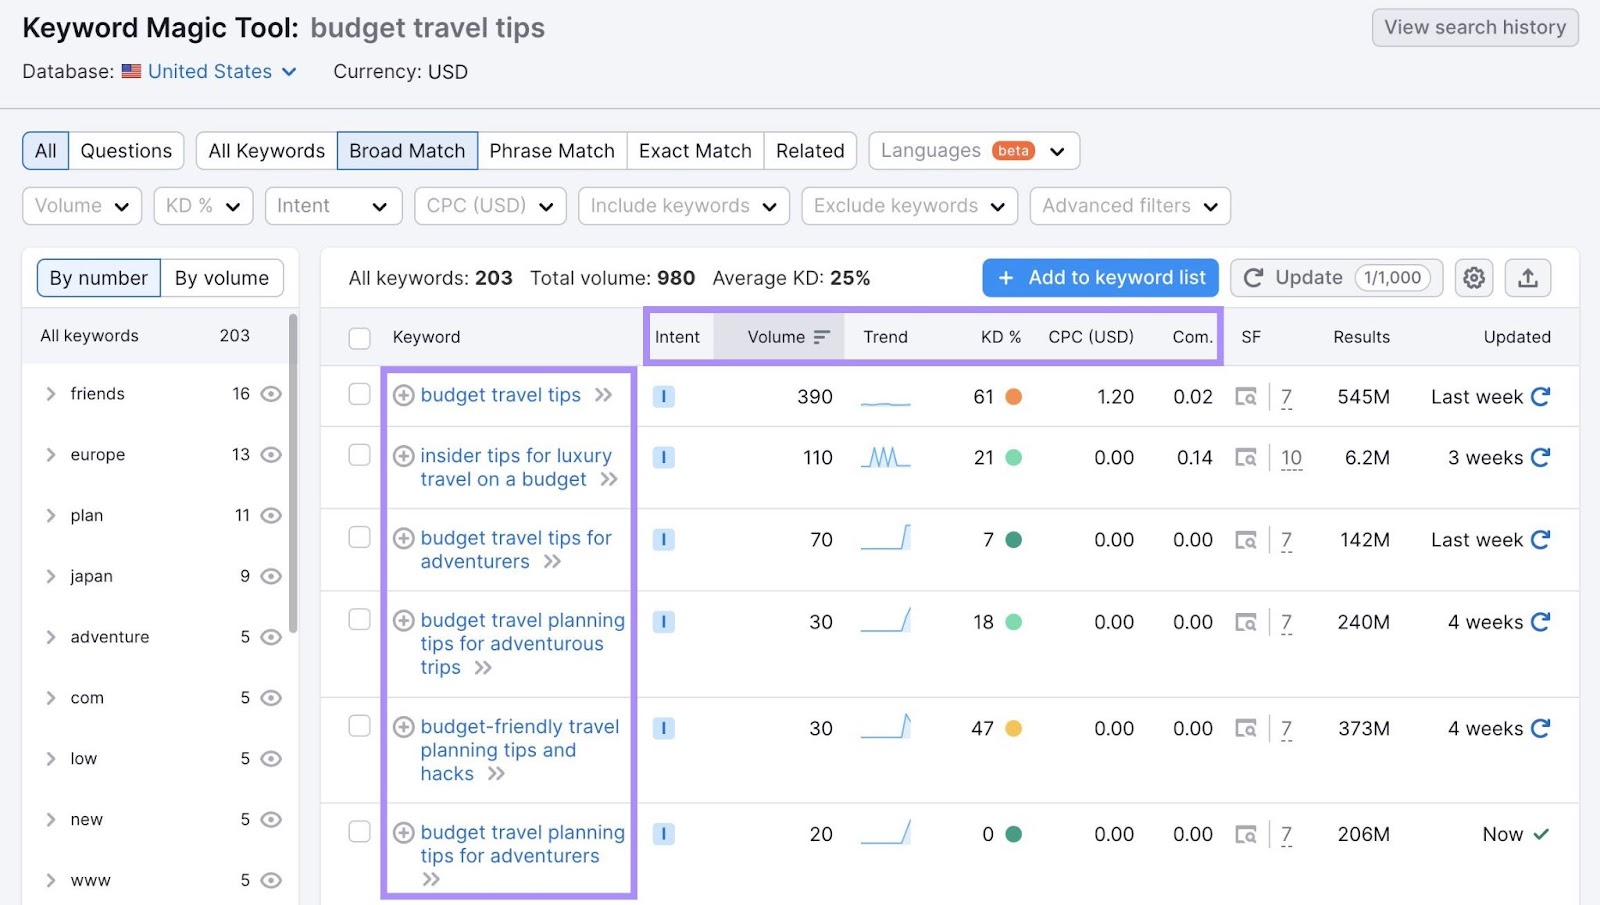 A list of keywords related to "budget travel tips" shown in Keyword Magic Tool